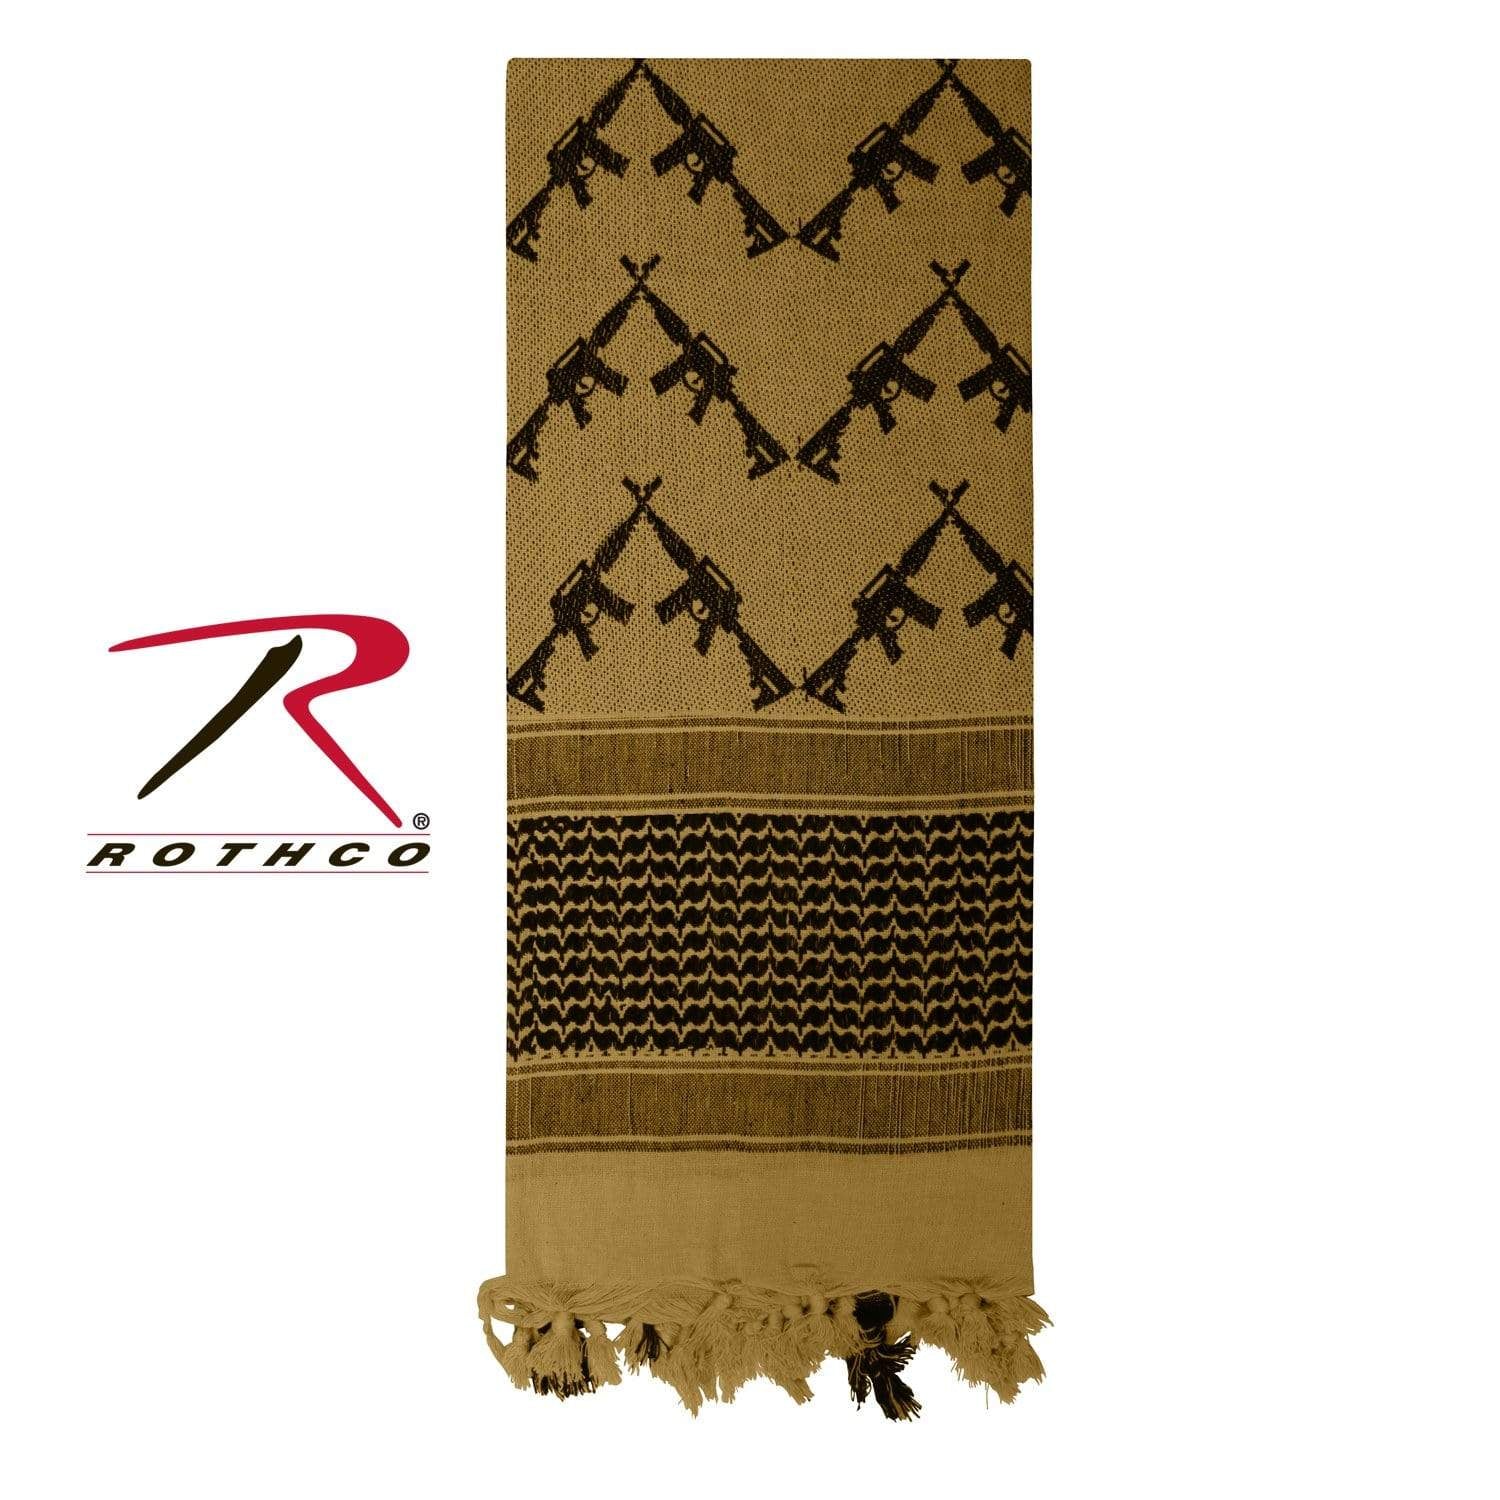 Rothco Crossed Rifles Shemagh Tactical Desert Keffiyeh Scarf - Coyote Brown - Eminent Paintball And Airsoft